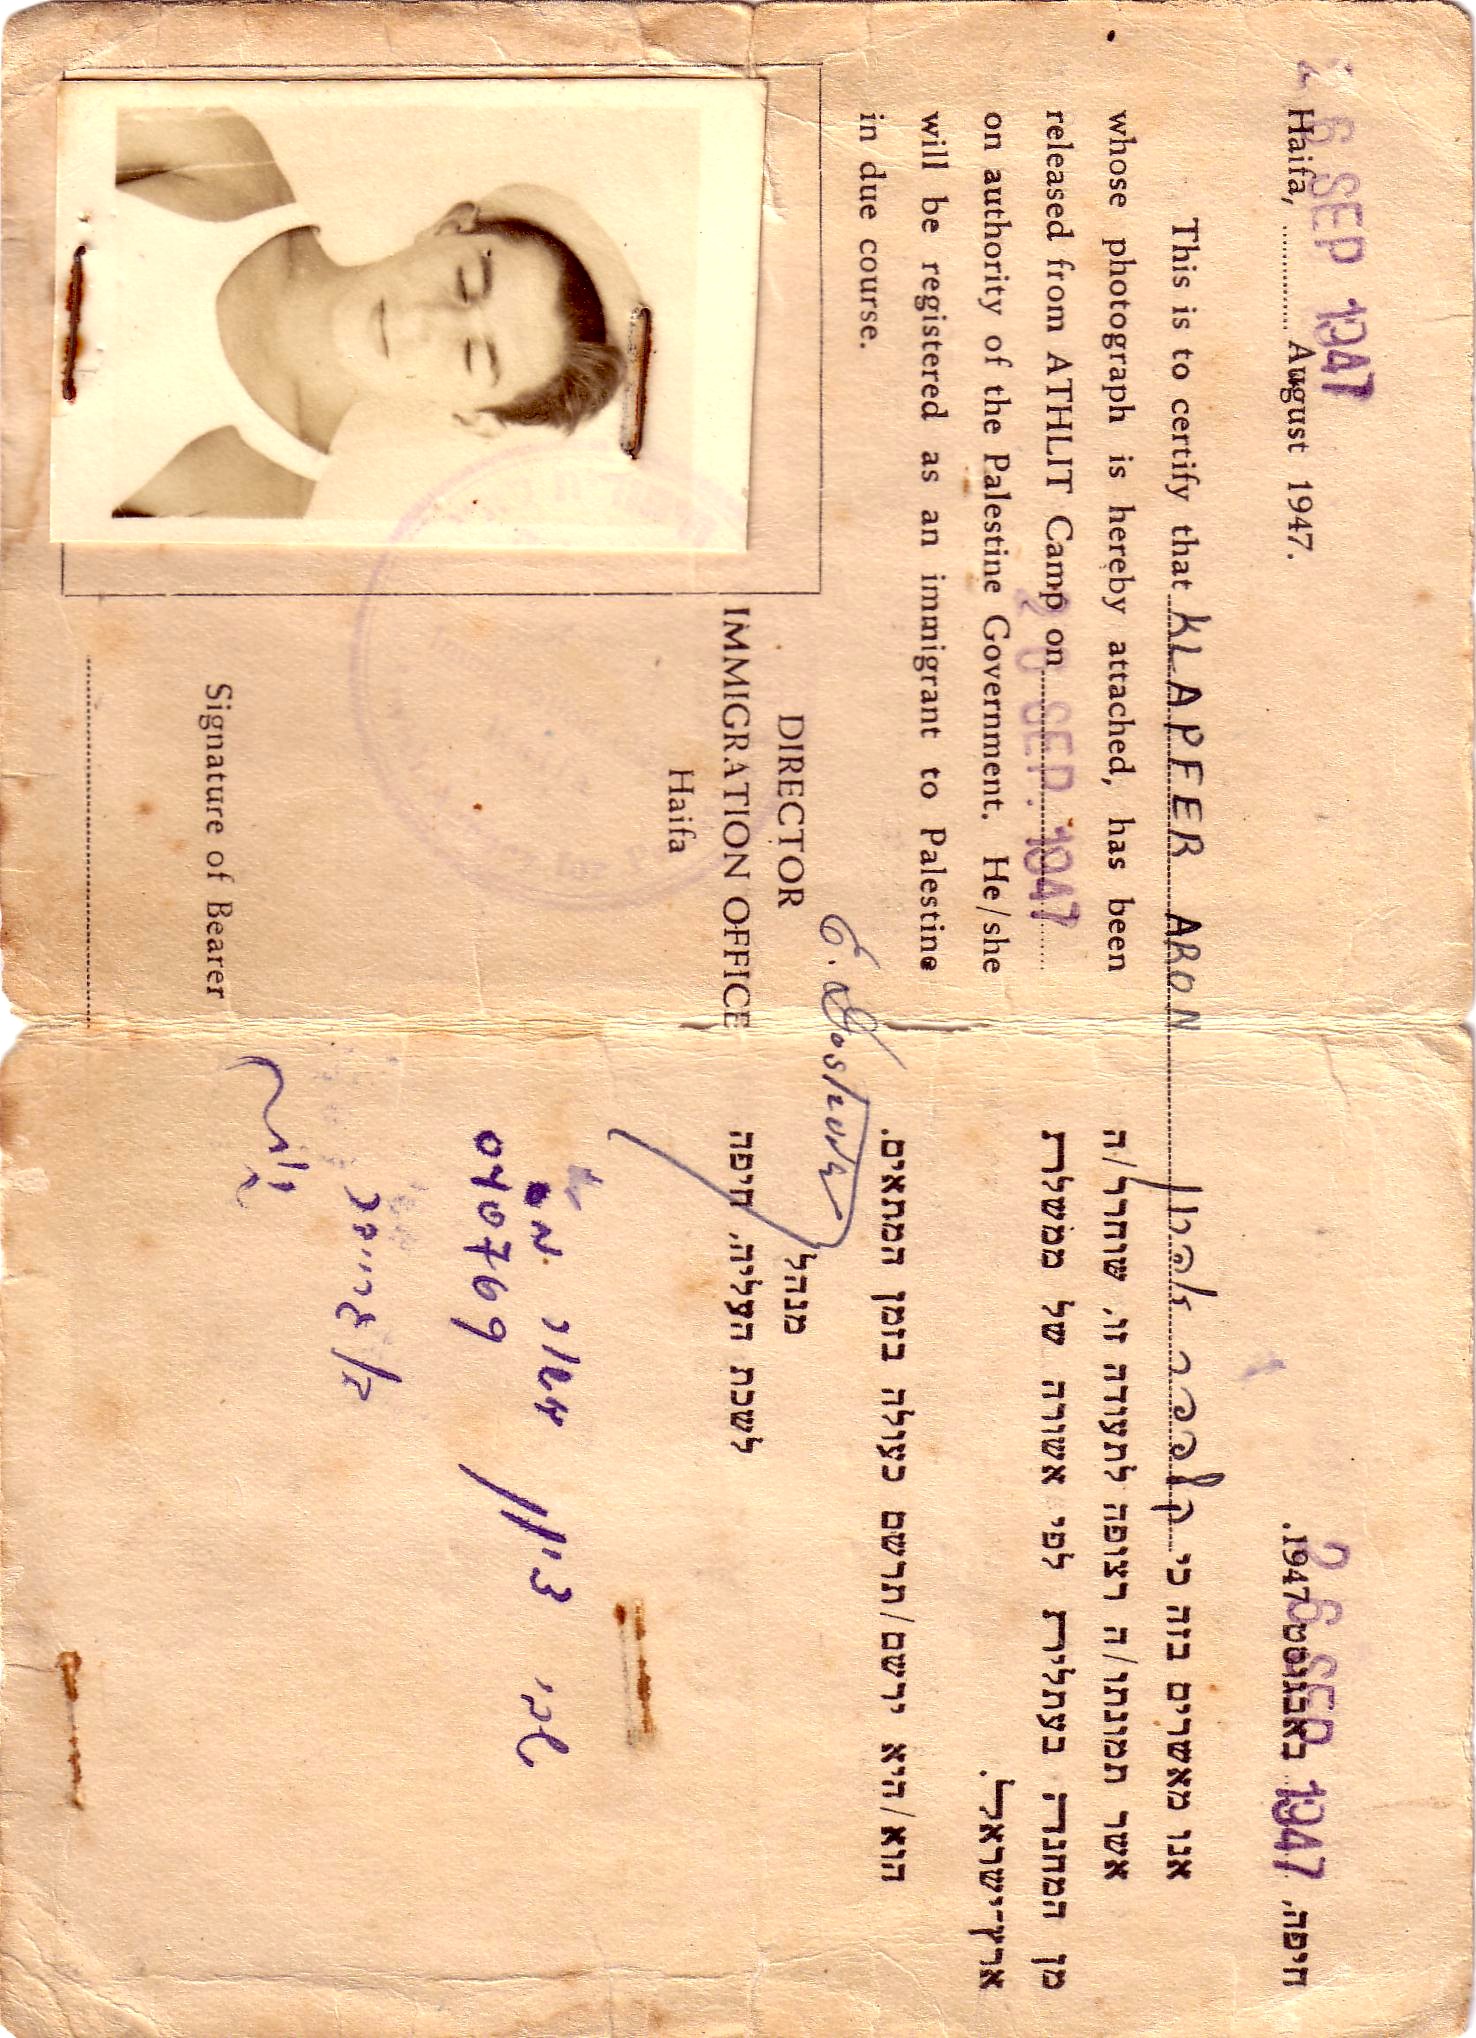 Certificate of Aharon's release from the Atlit detention camp in 1947.